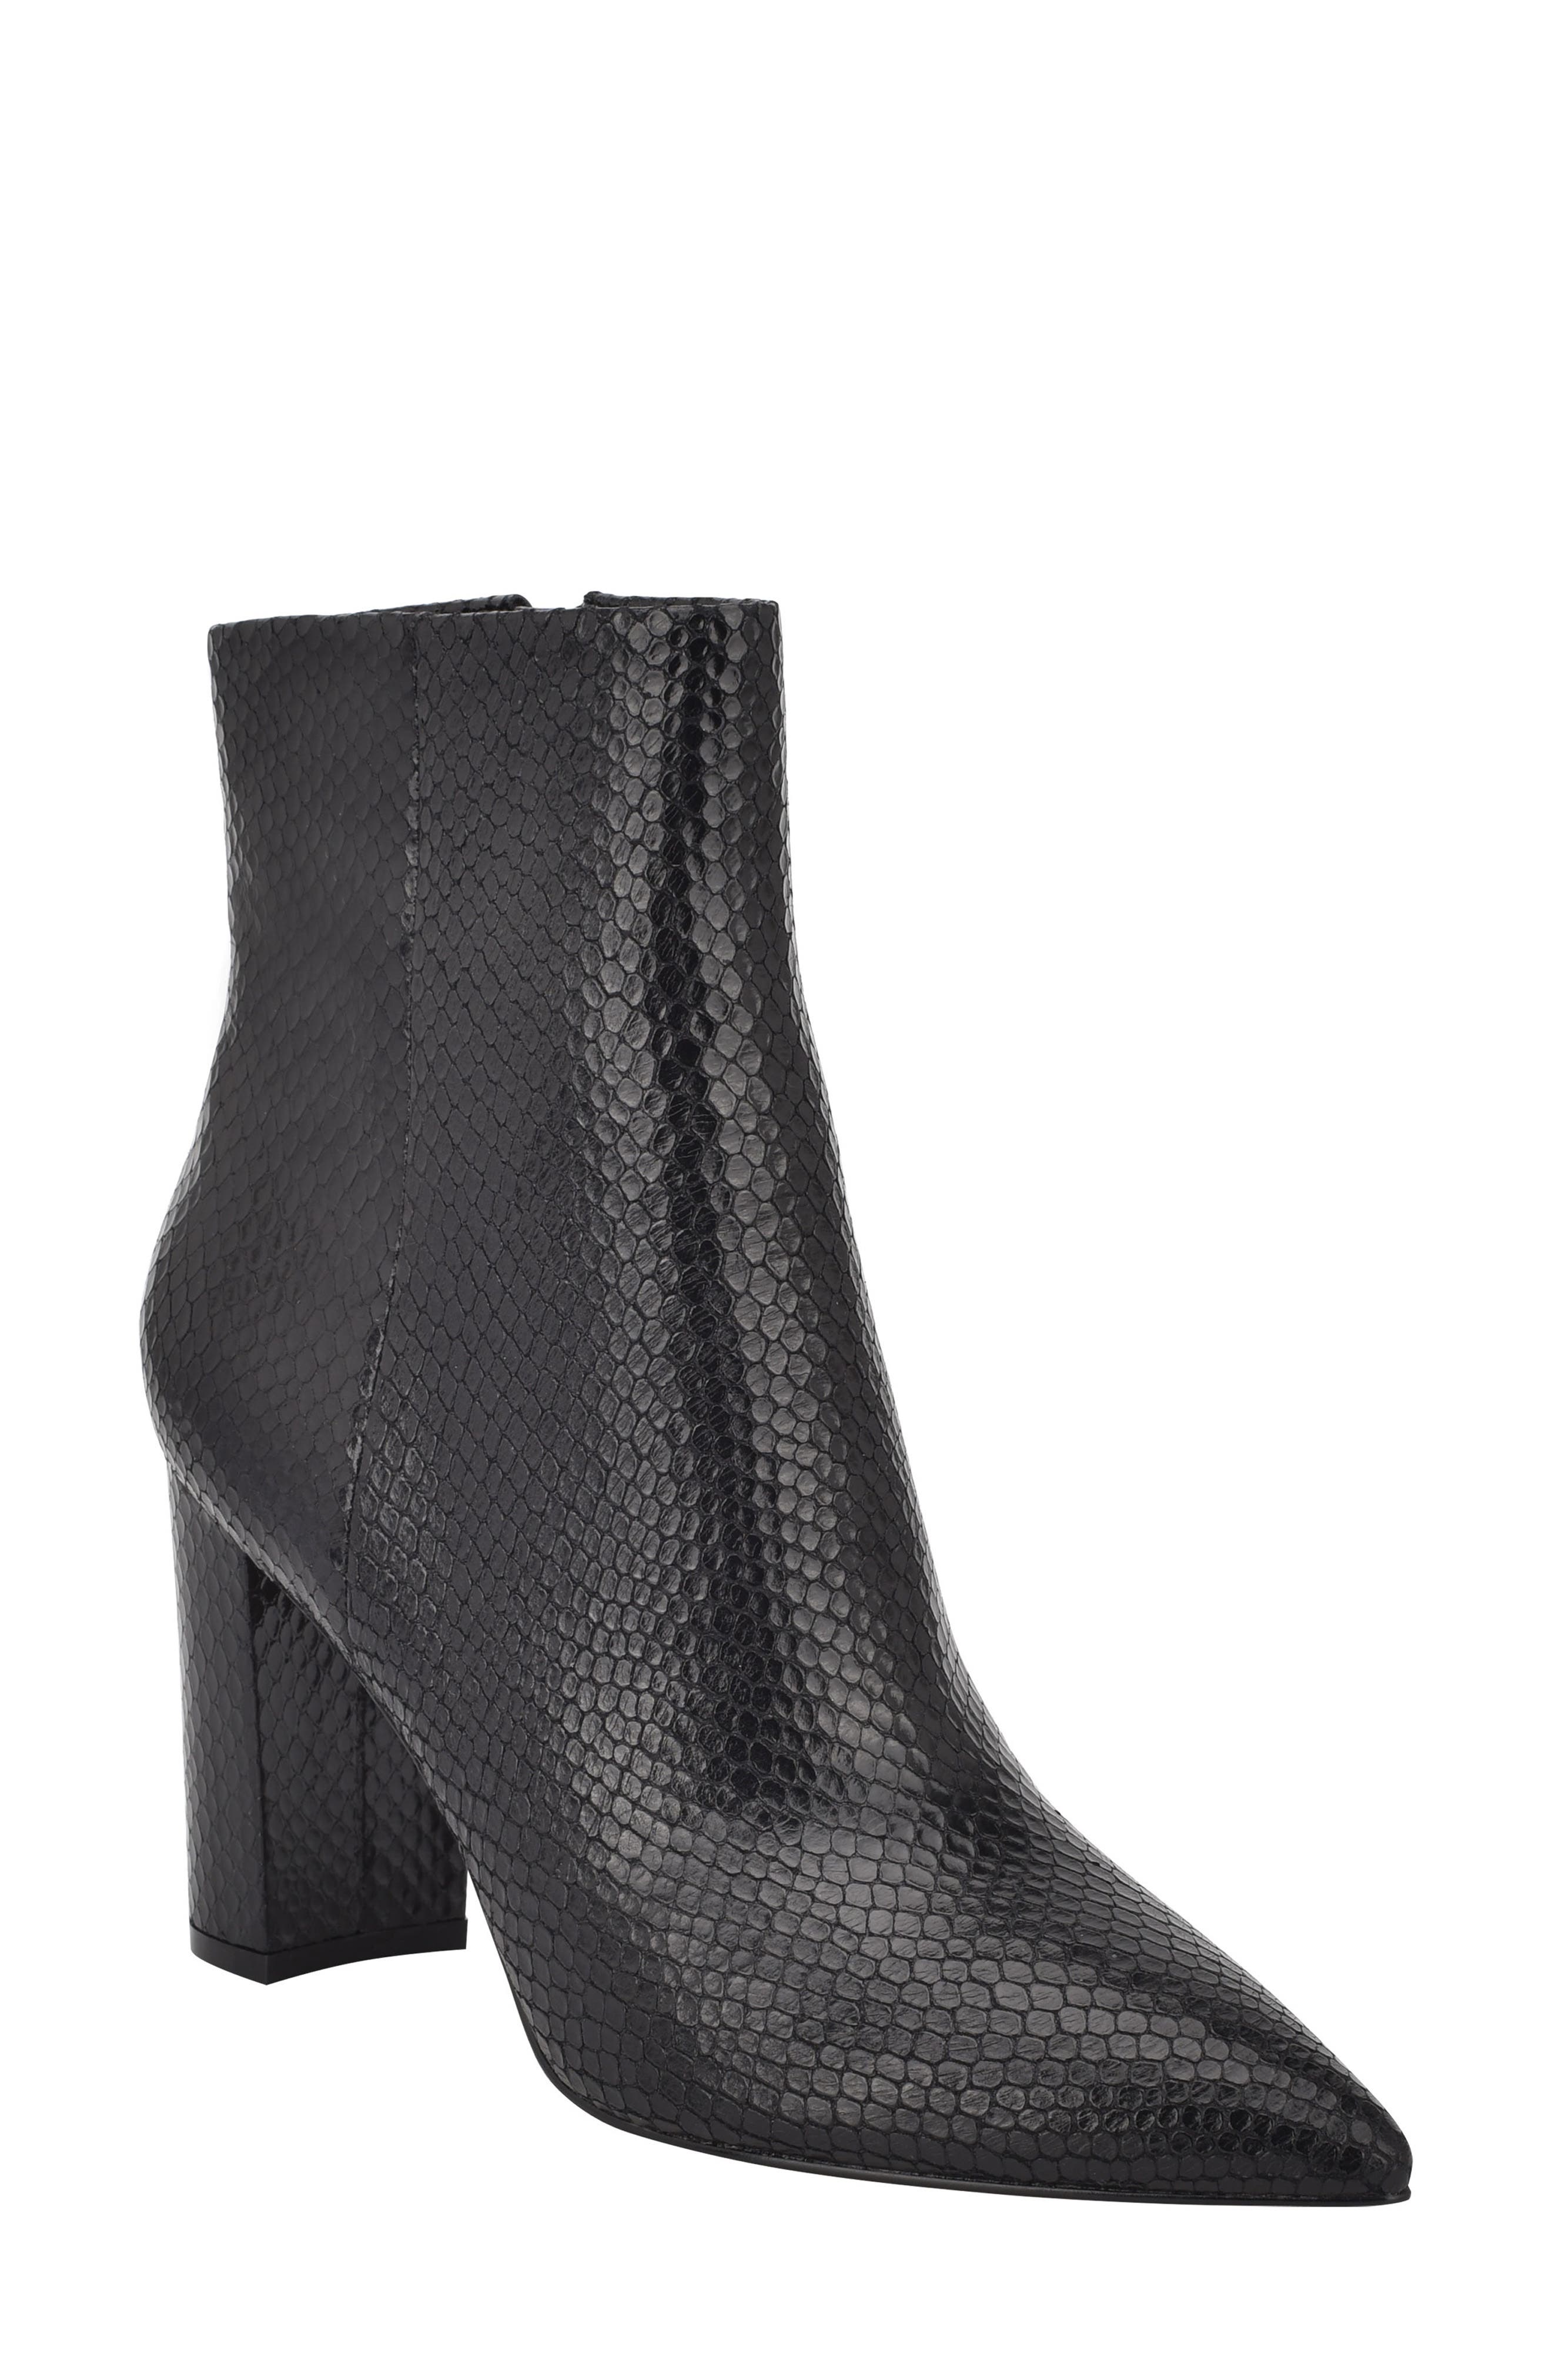 Marc Fisher Ltd Ulani Embossed Pointed Bootie In Black Snake Print